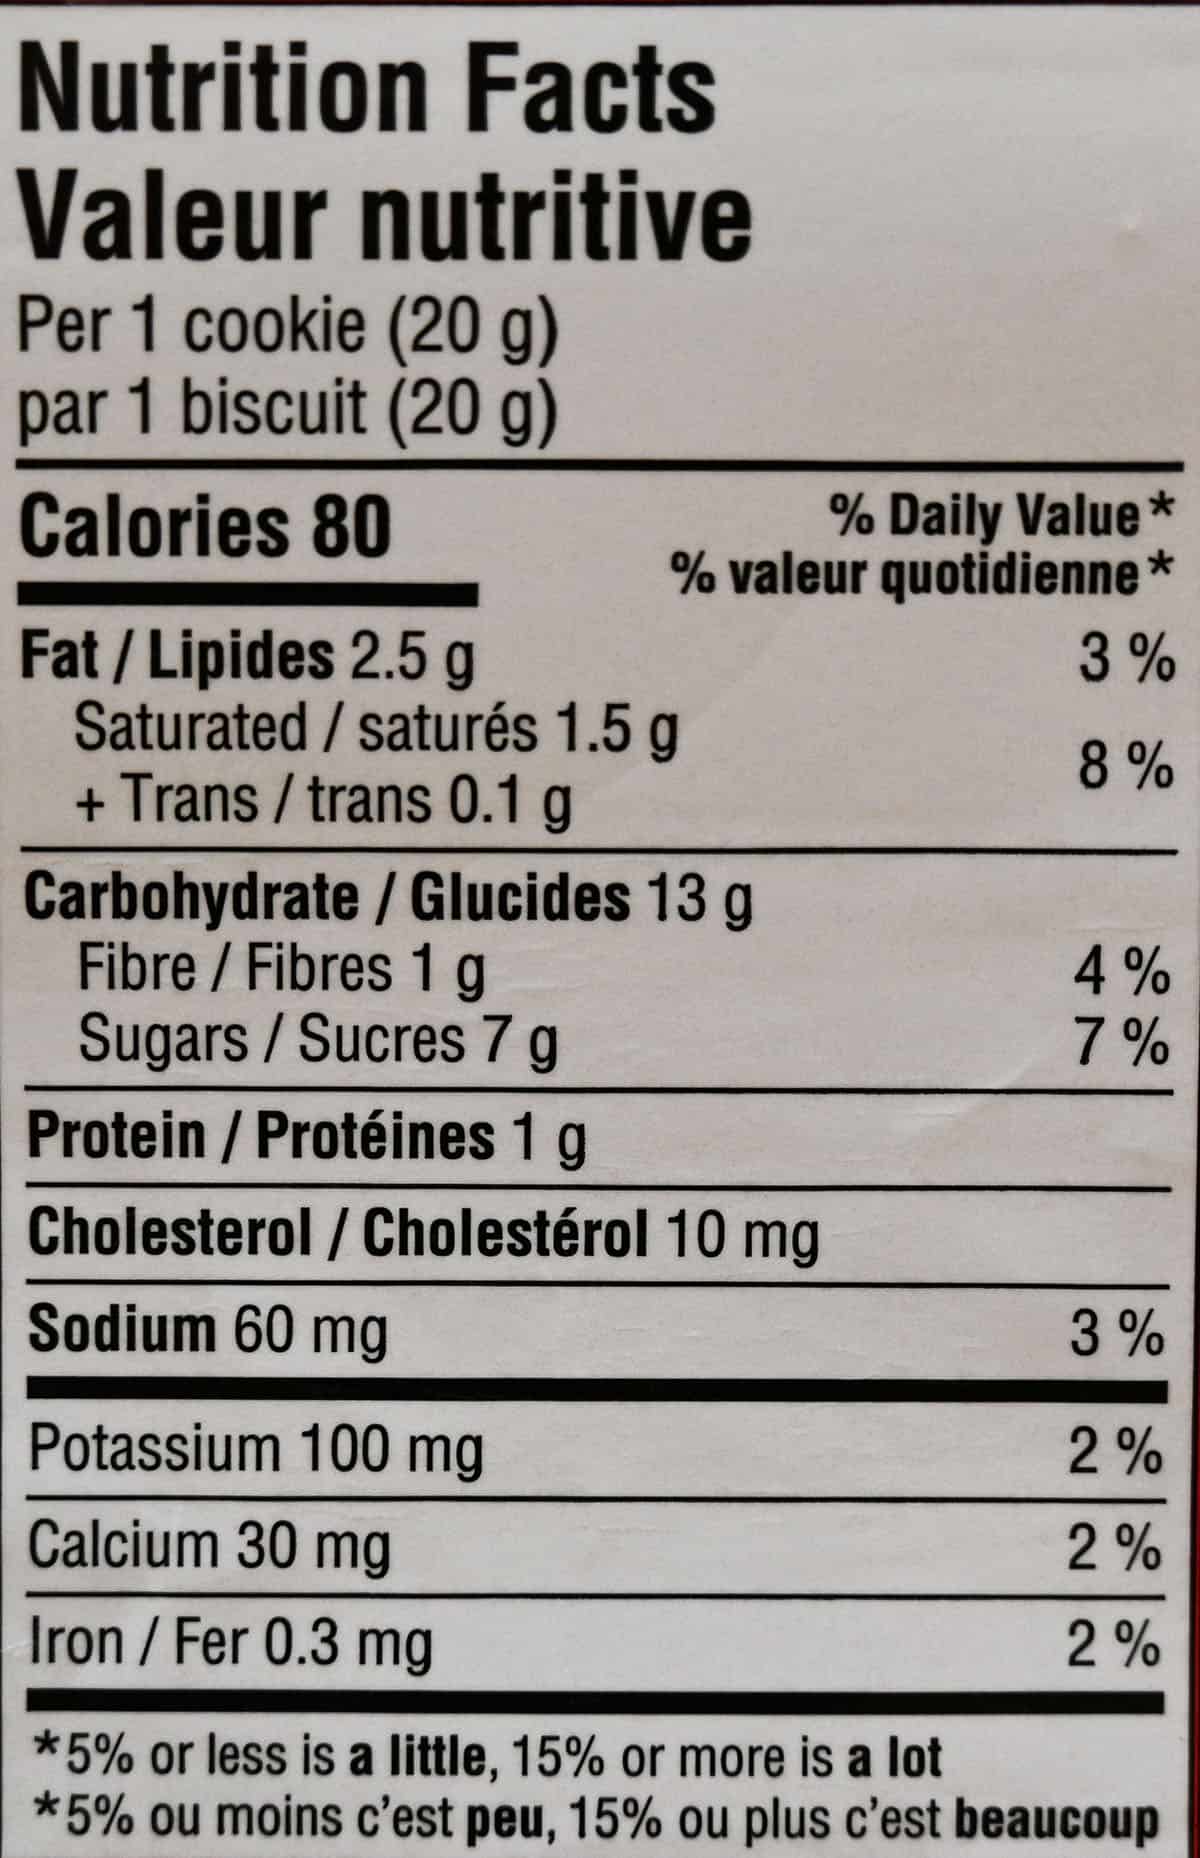 Ginger cookie nutrition facts from the label.